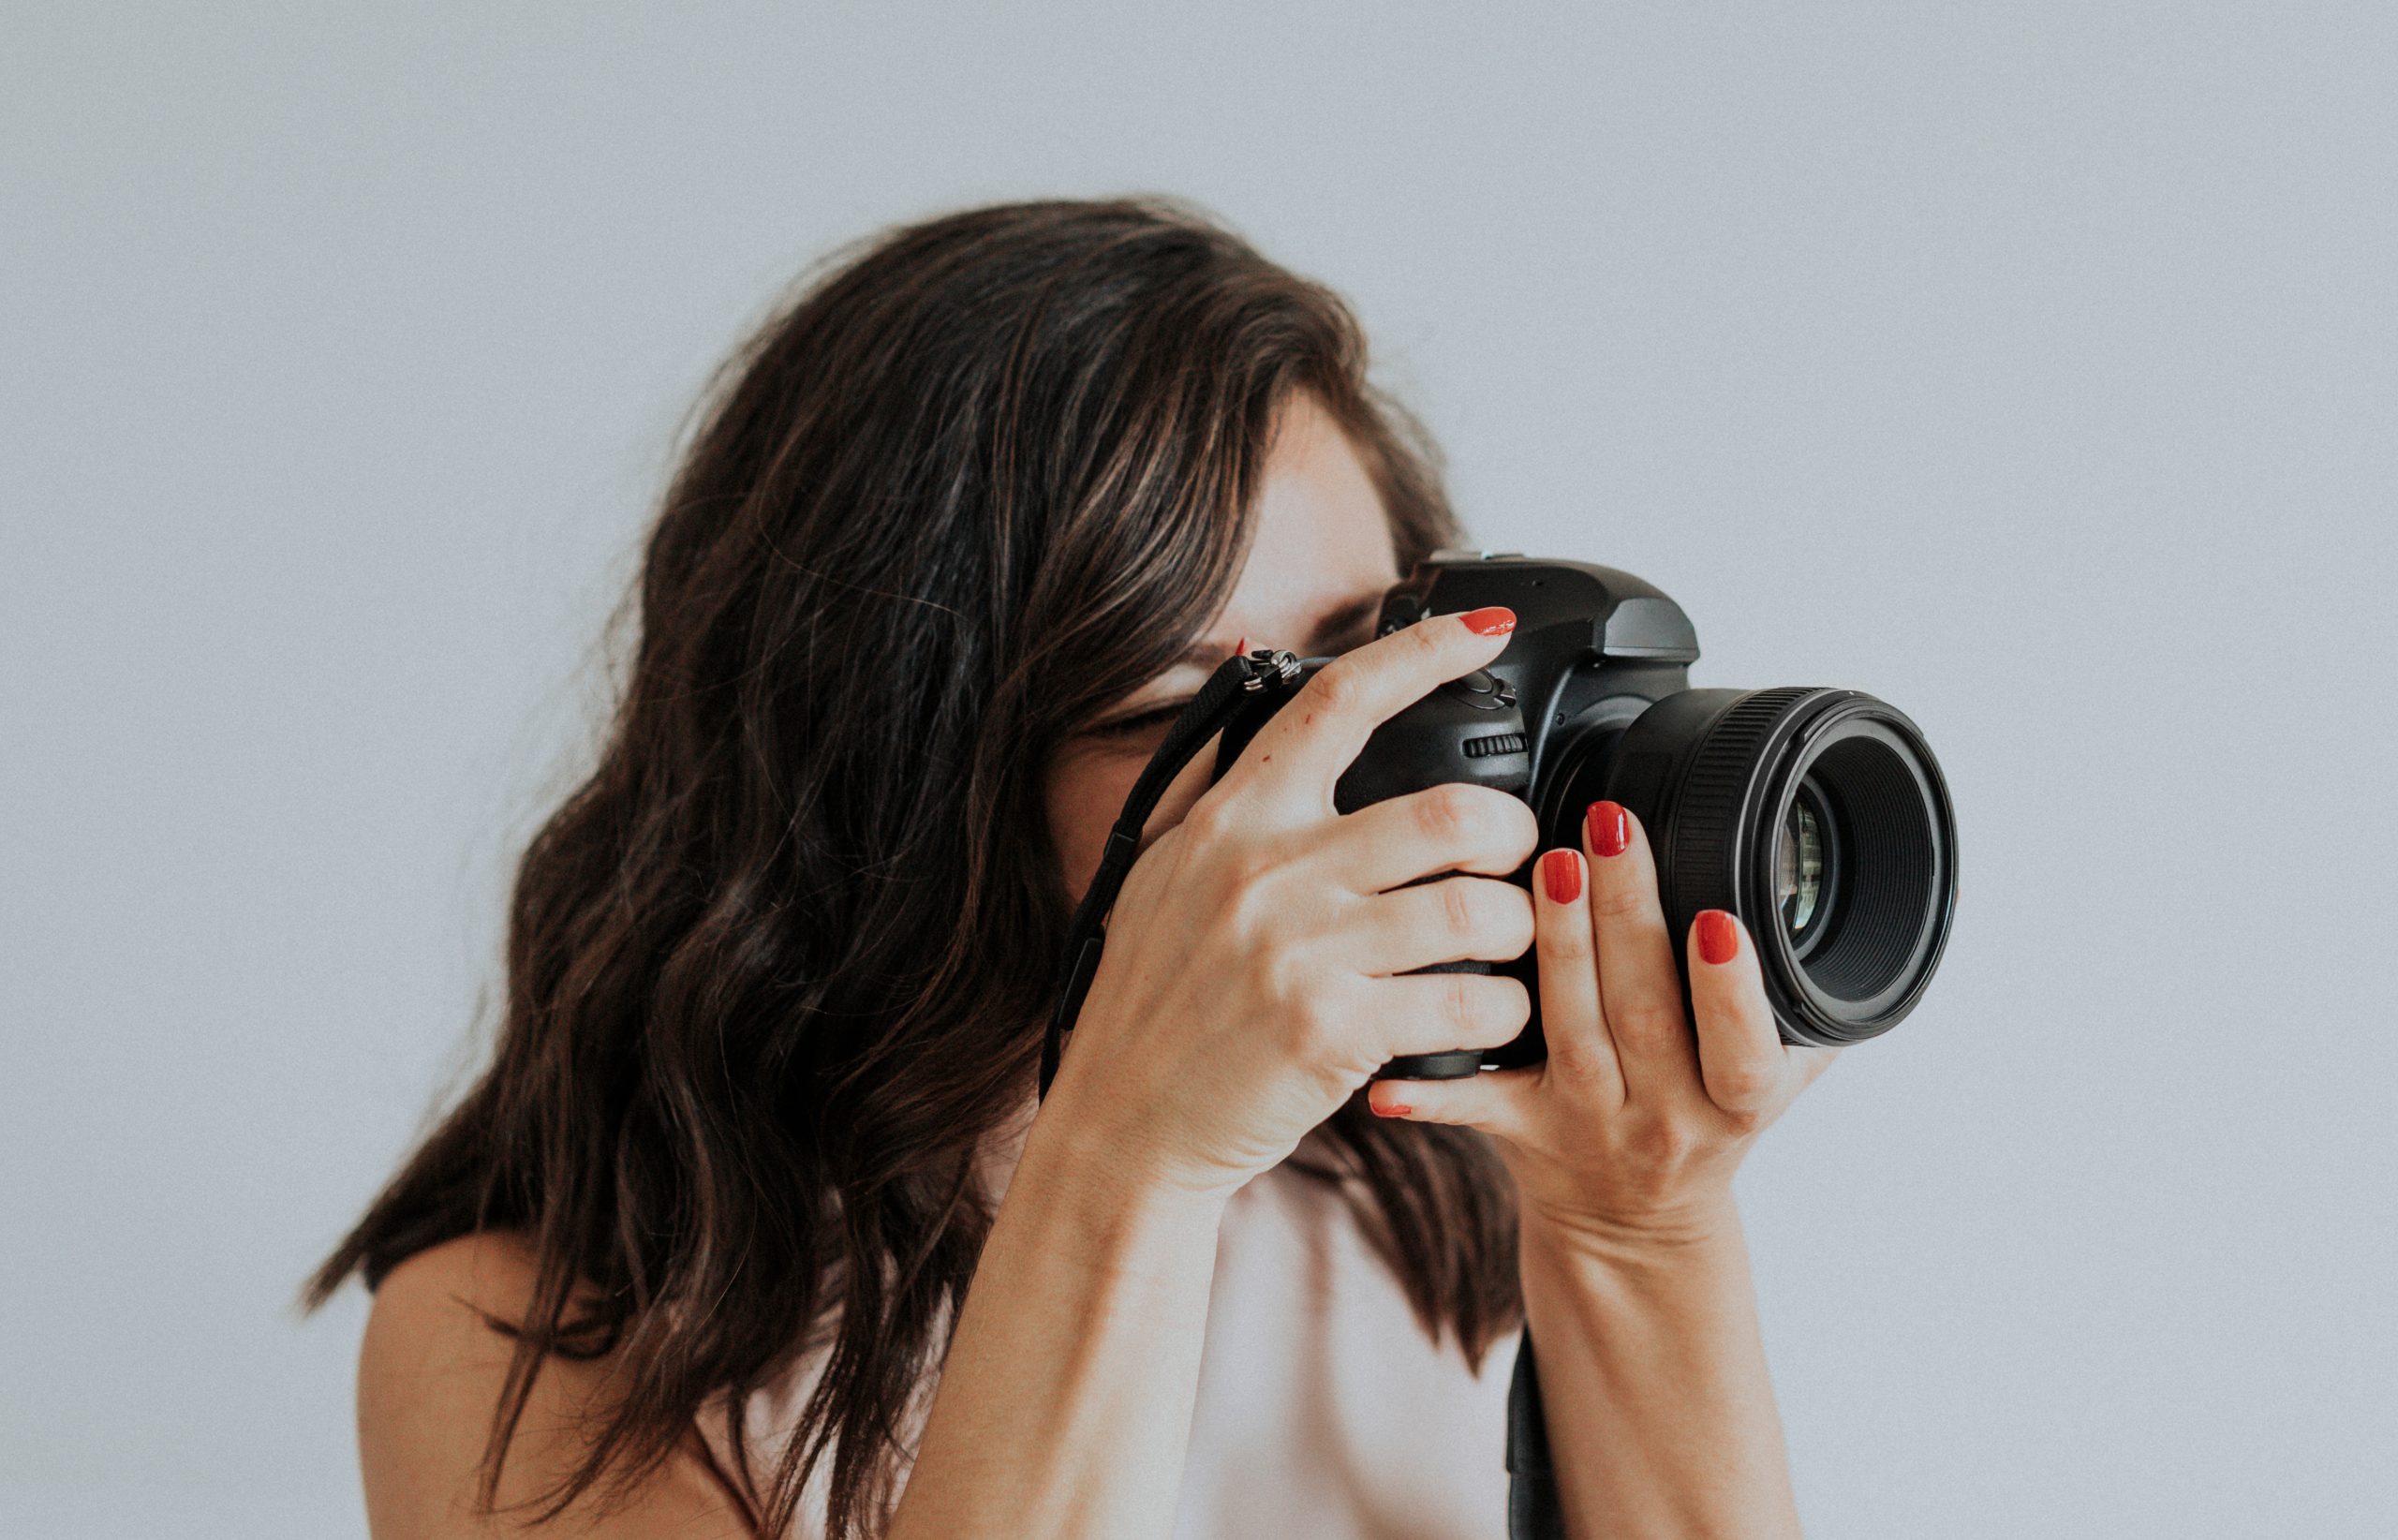 Female professional real estate photographer at a shoot holding digital camera